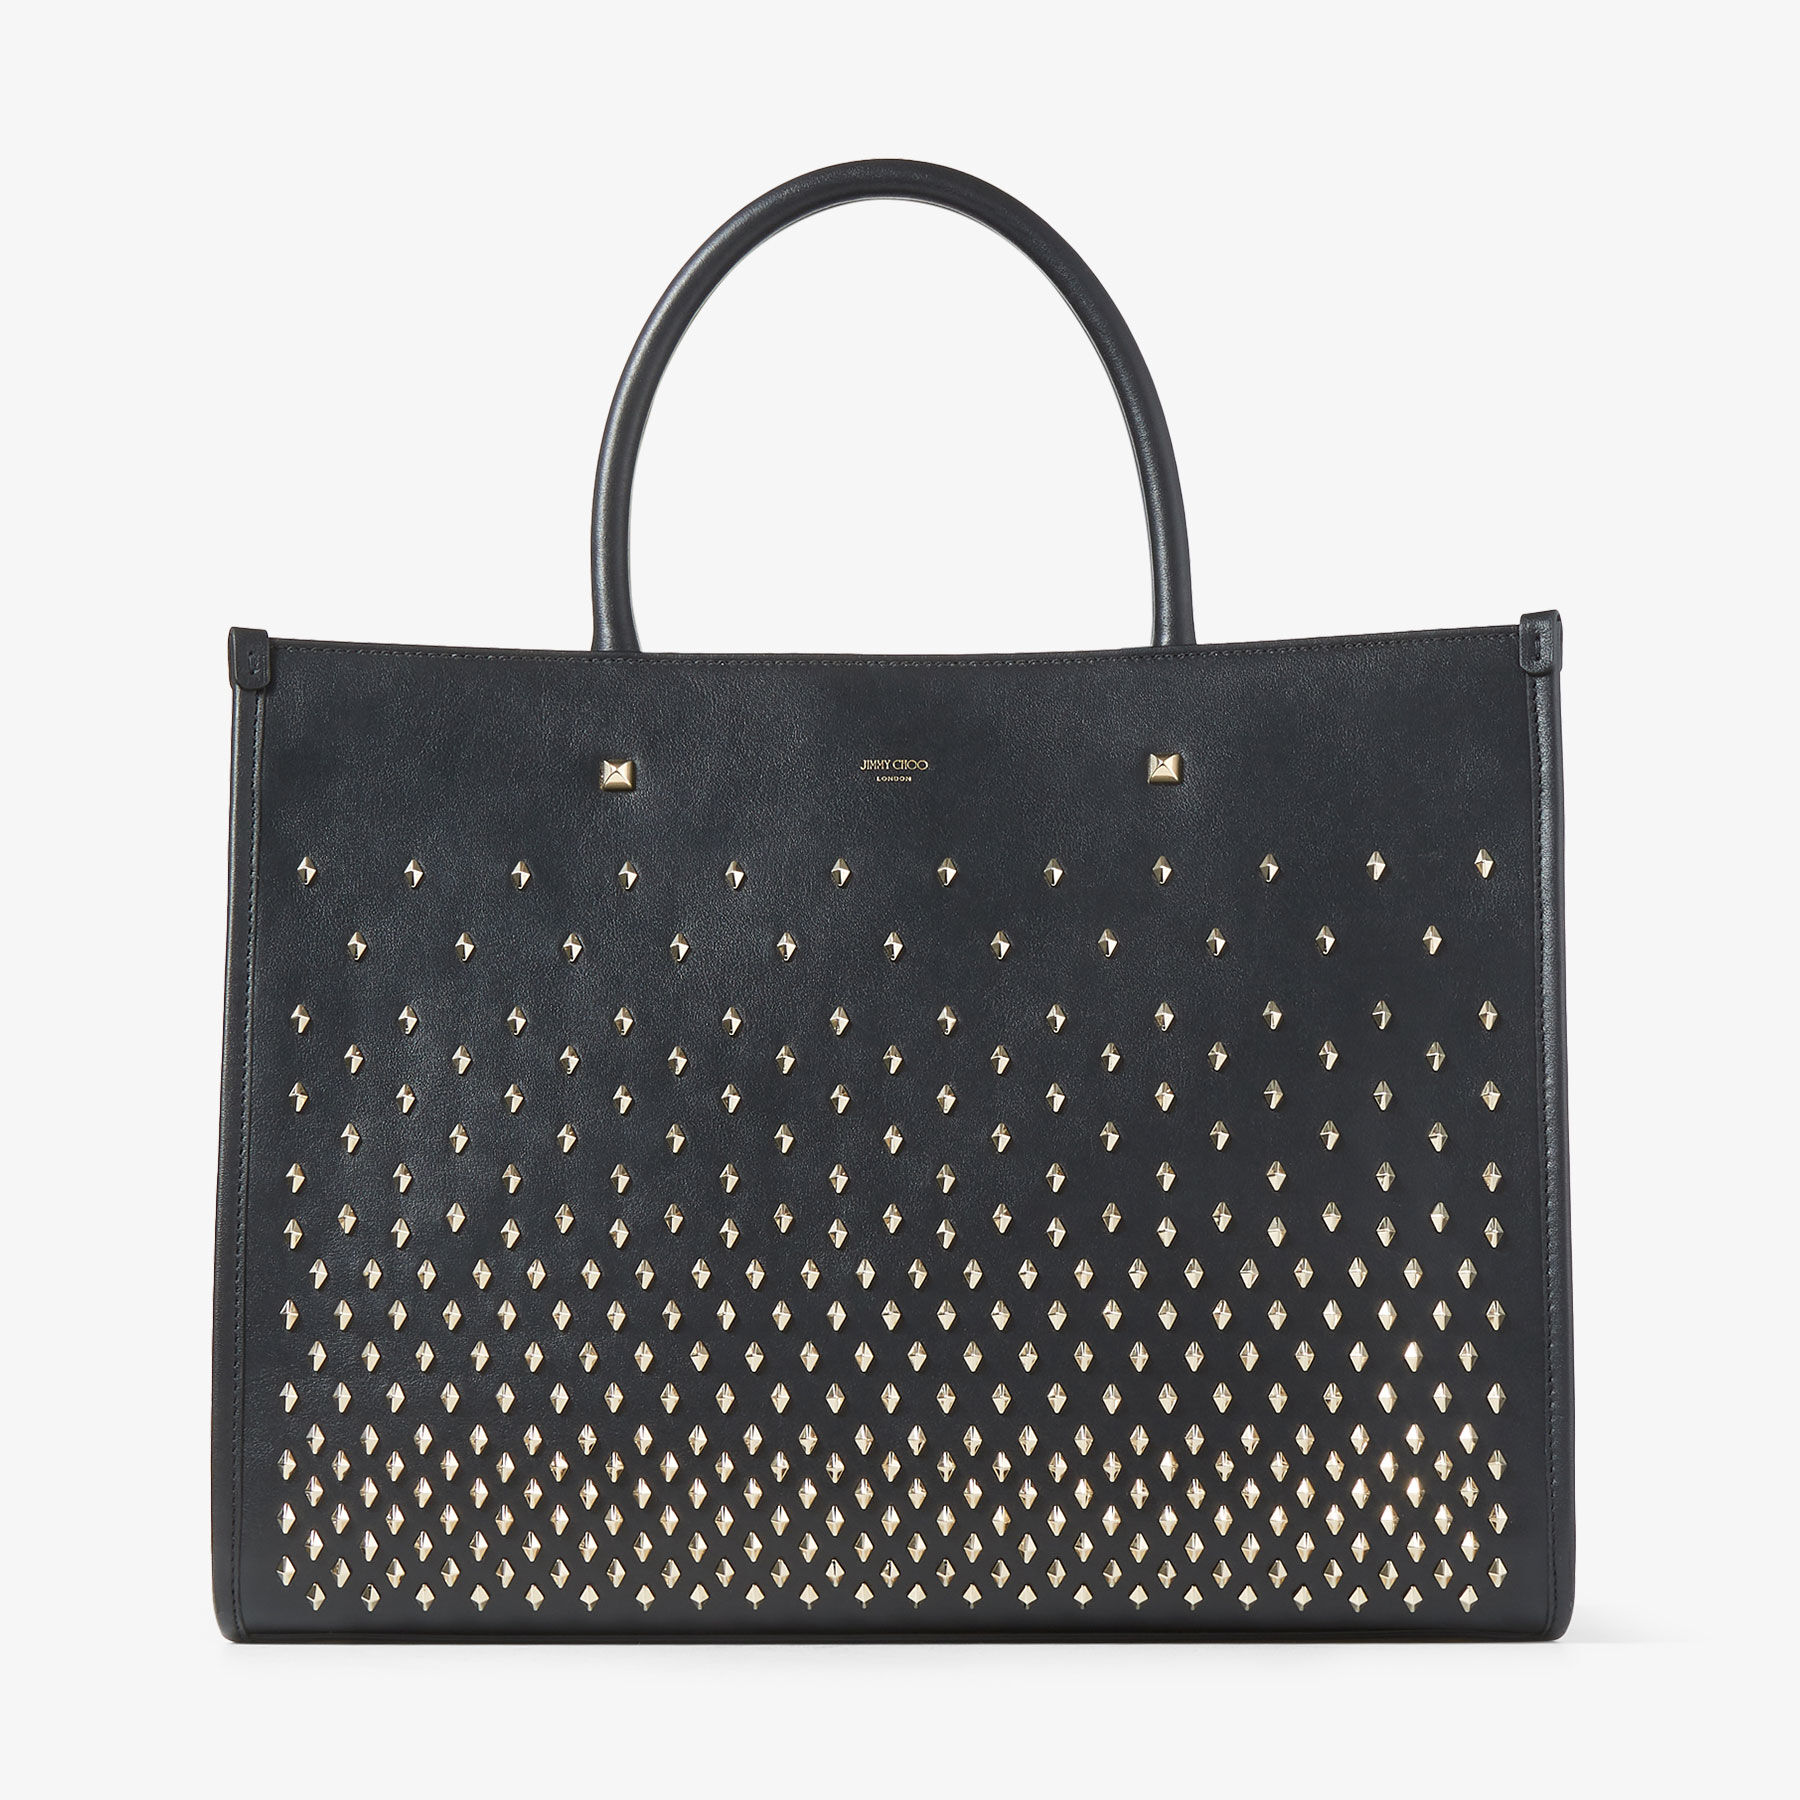 AVENUE M TOTE | Black Leather Tote Bag with Studs | Summer 